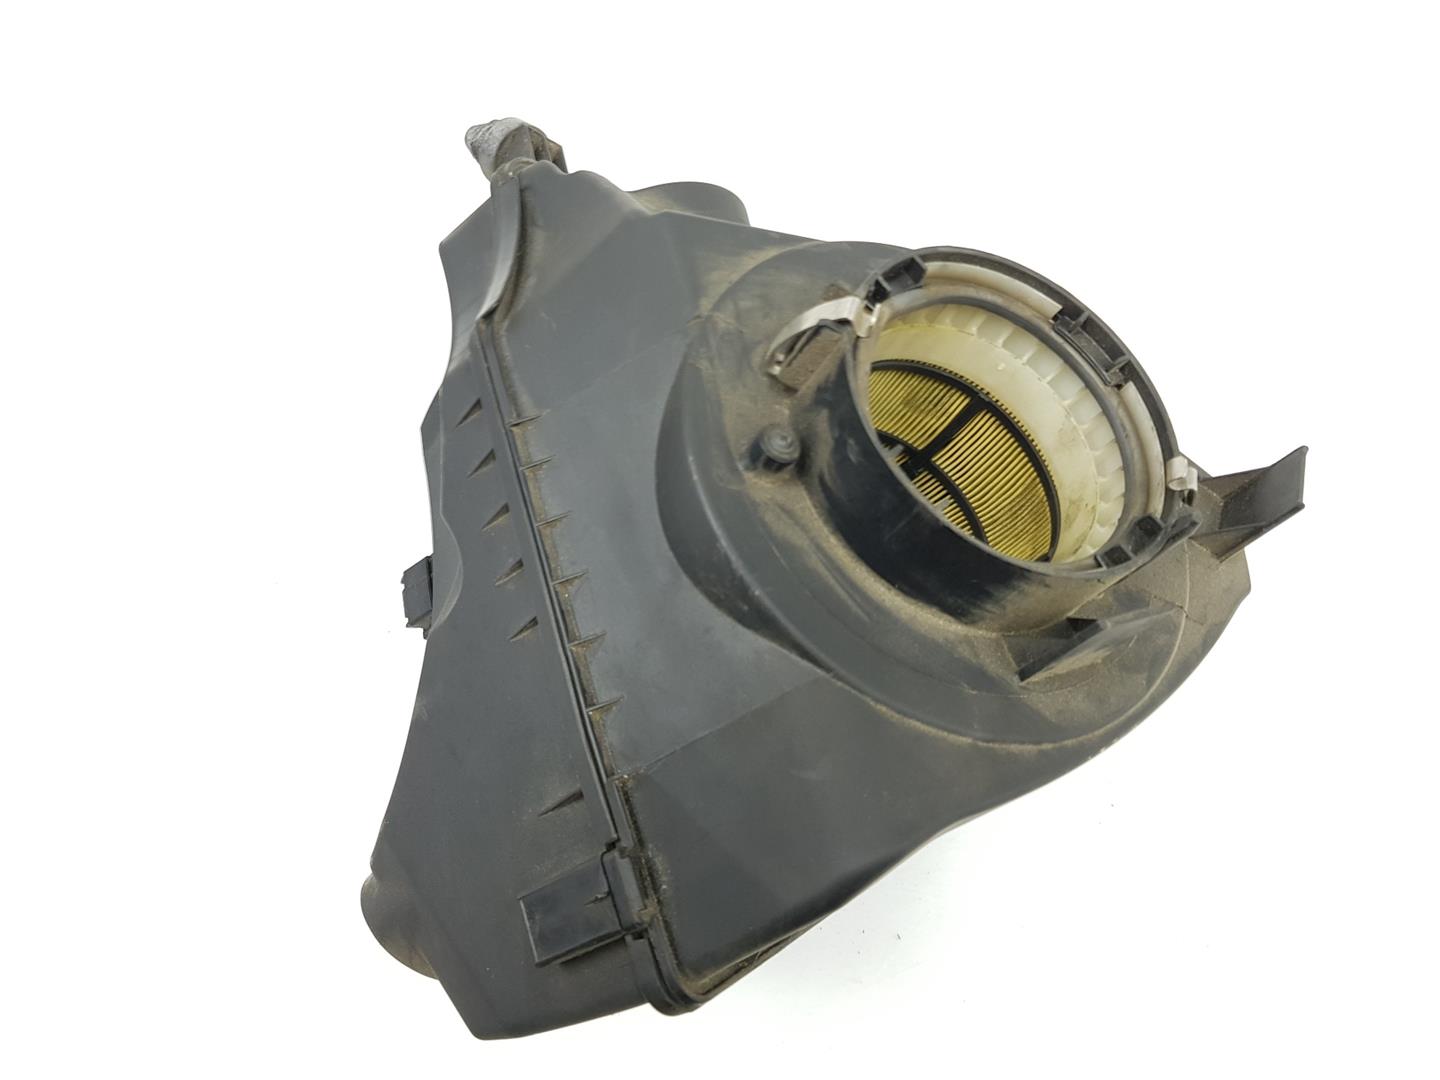 AUDI A6 allroad C6 (2006-2011) Other Engine Compartment Parts 4F0133837BB, 4F0133837BB 24198558